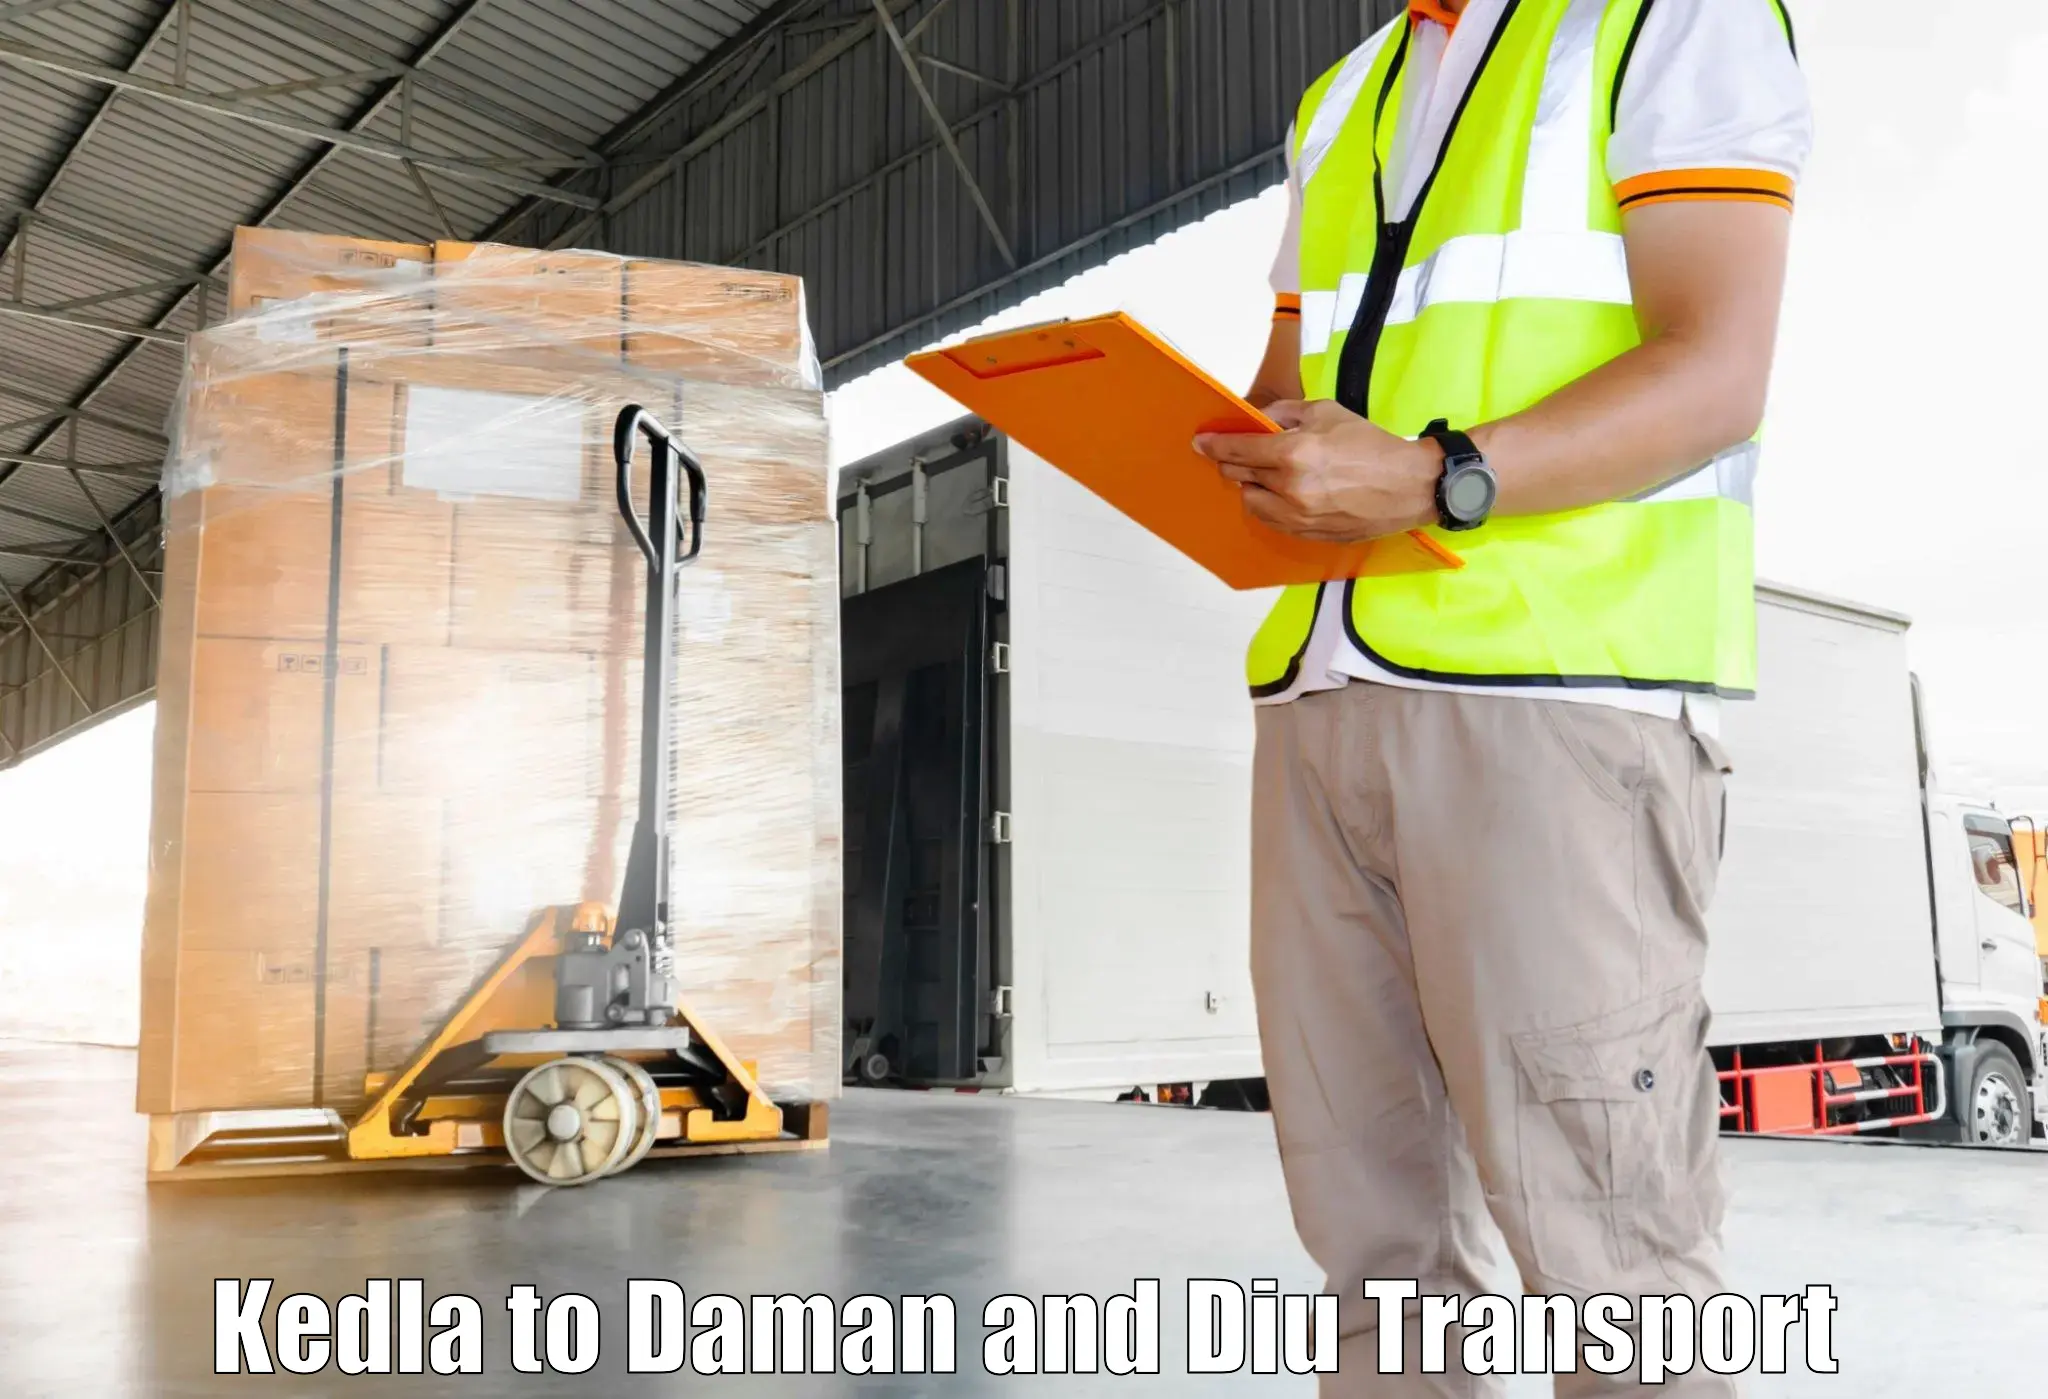 Delivery service Kedla to Daman and Diu